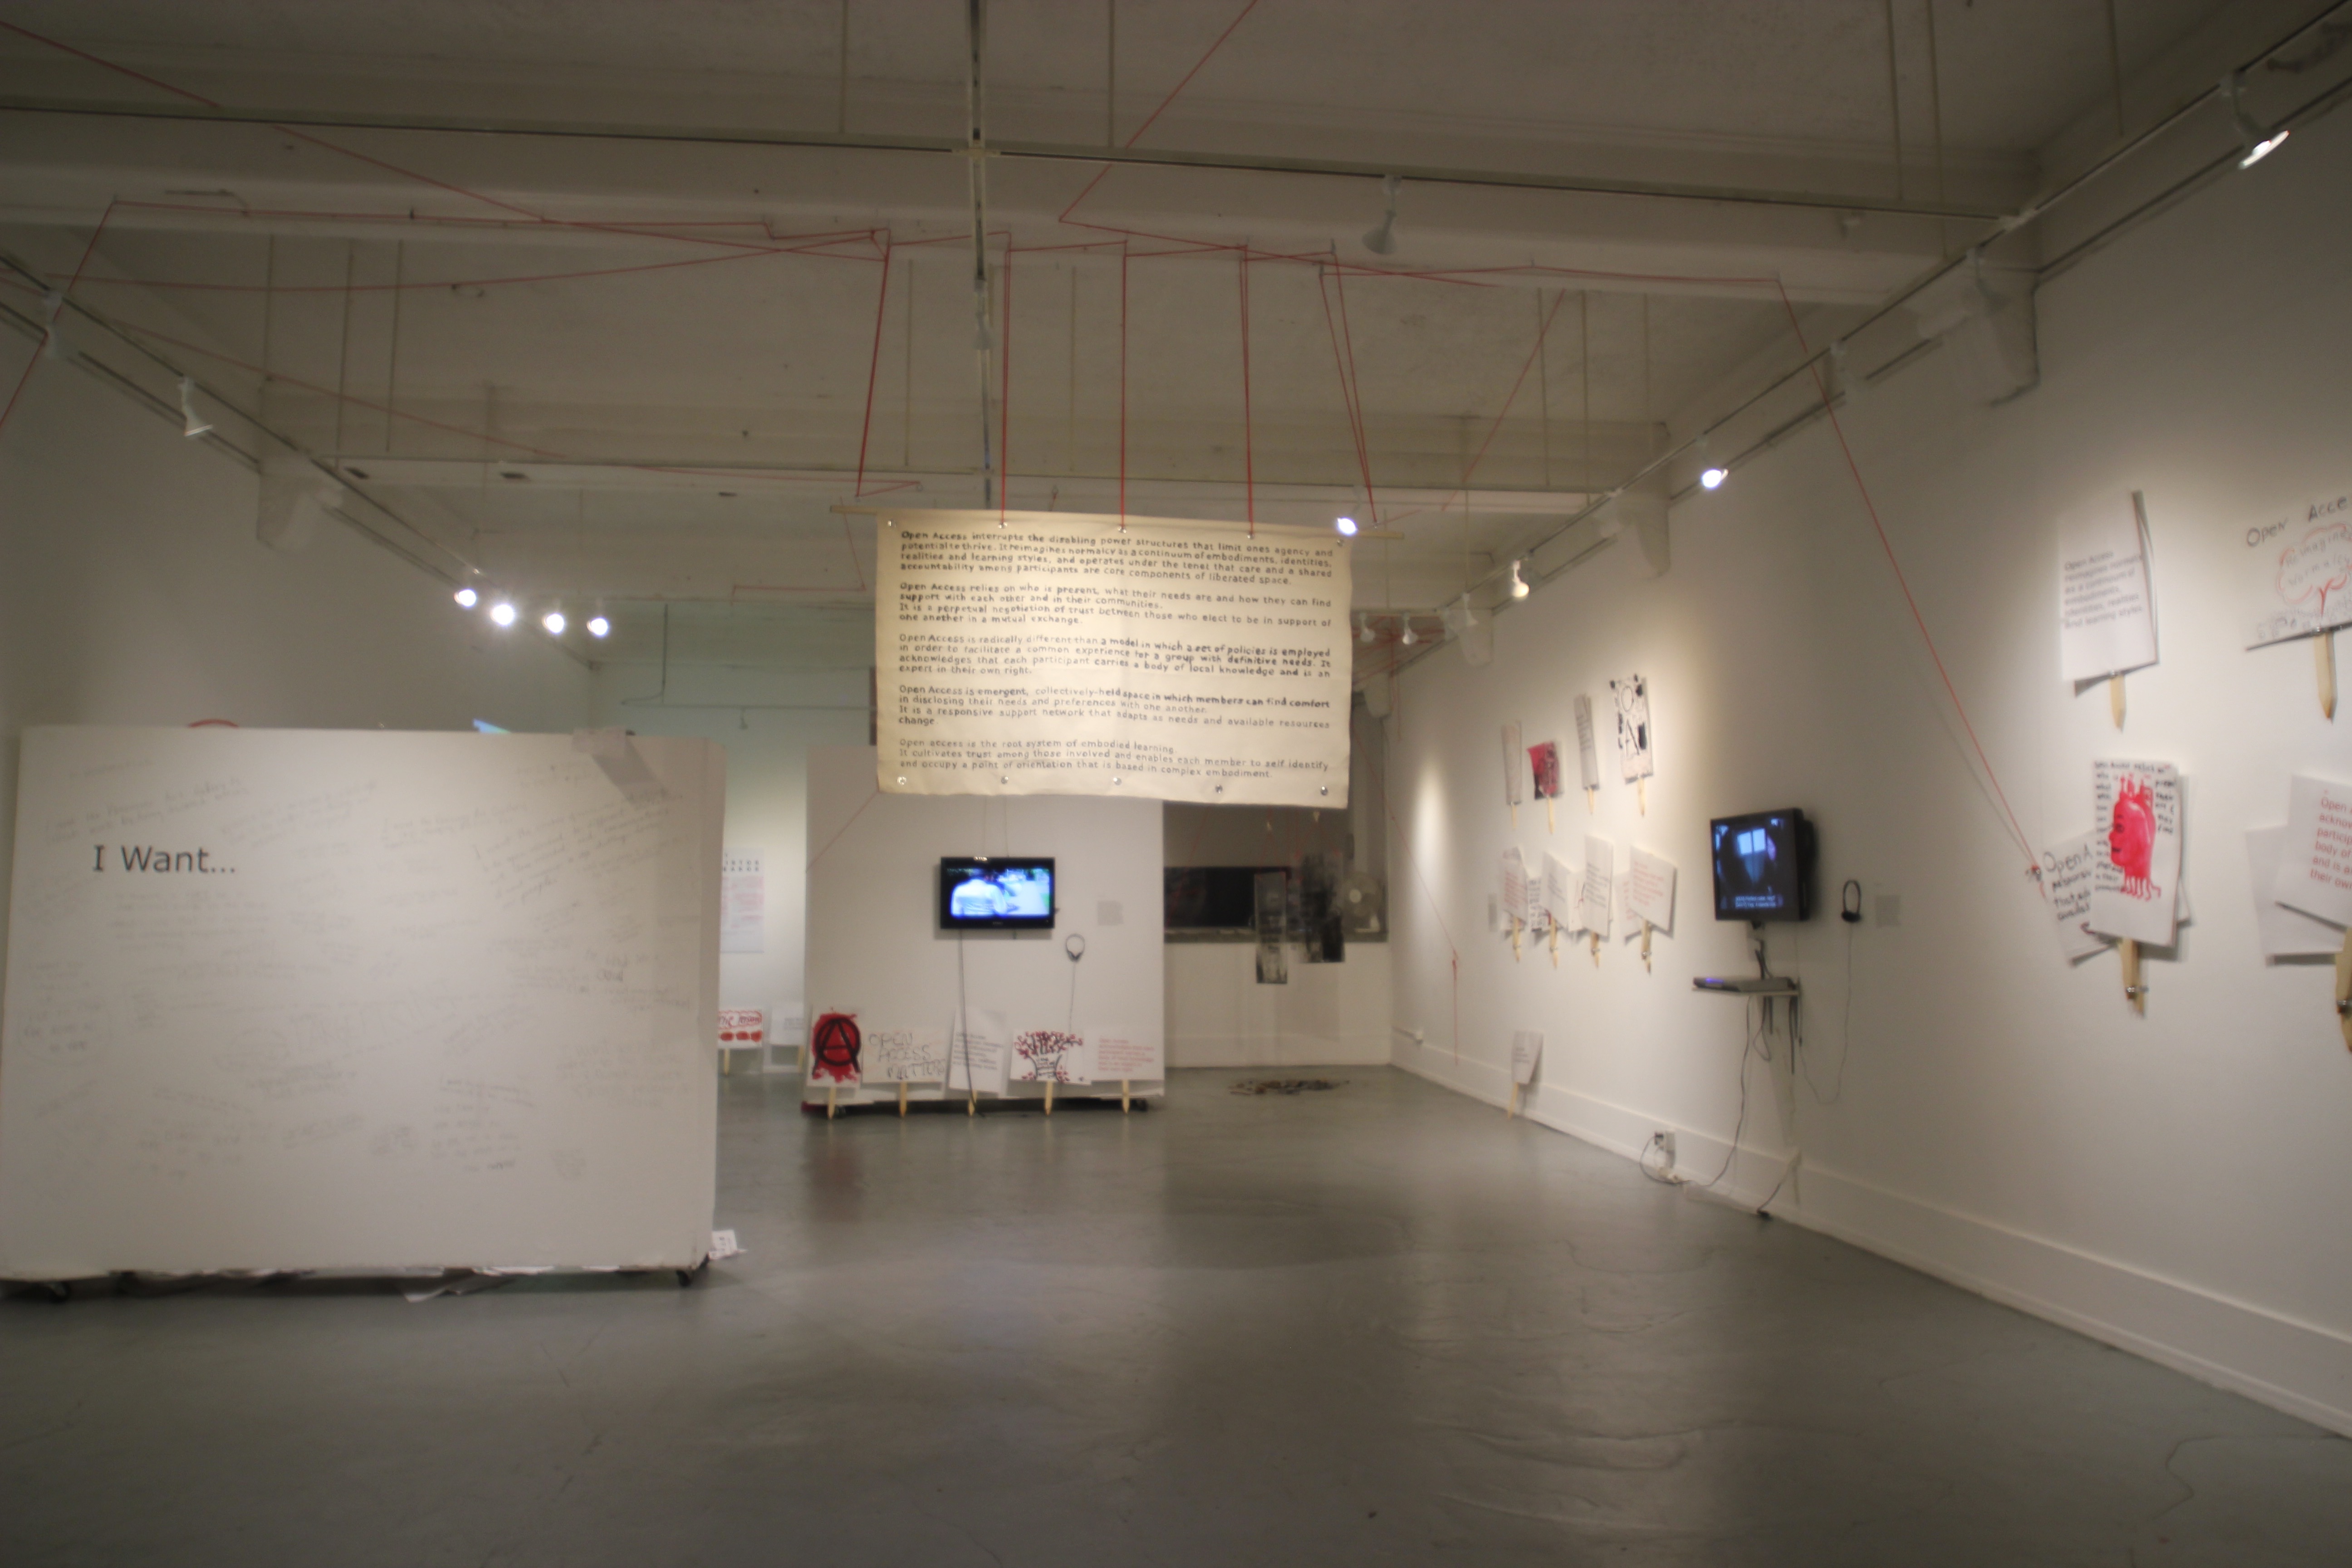 i-want-wall-installation-view-new-access-consortium-exhibition-gallery-gachet-vancouver-bc